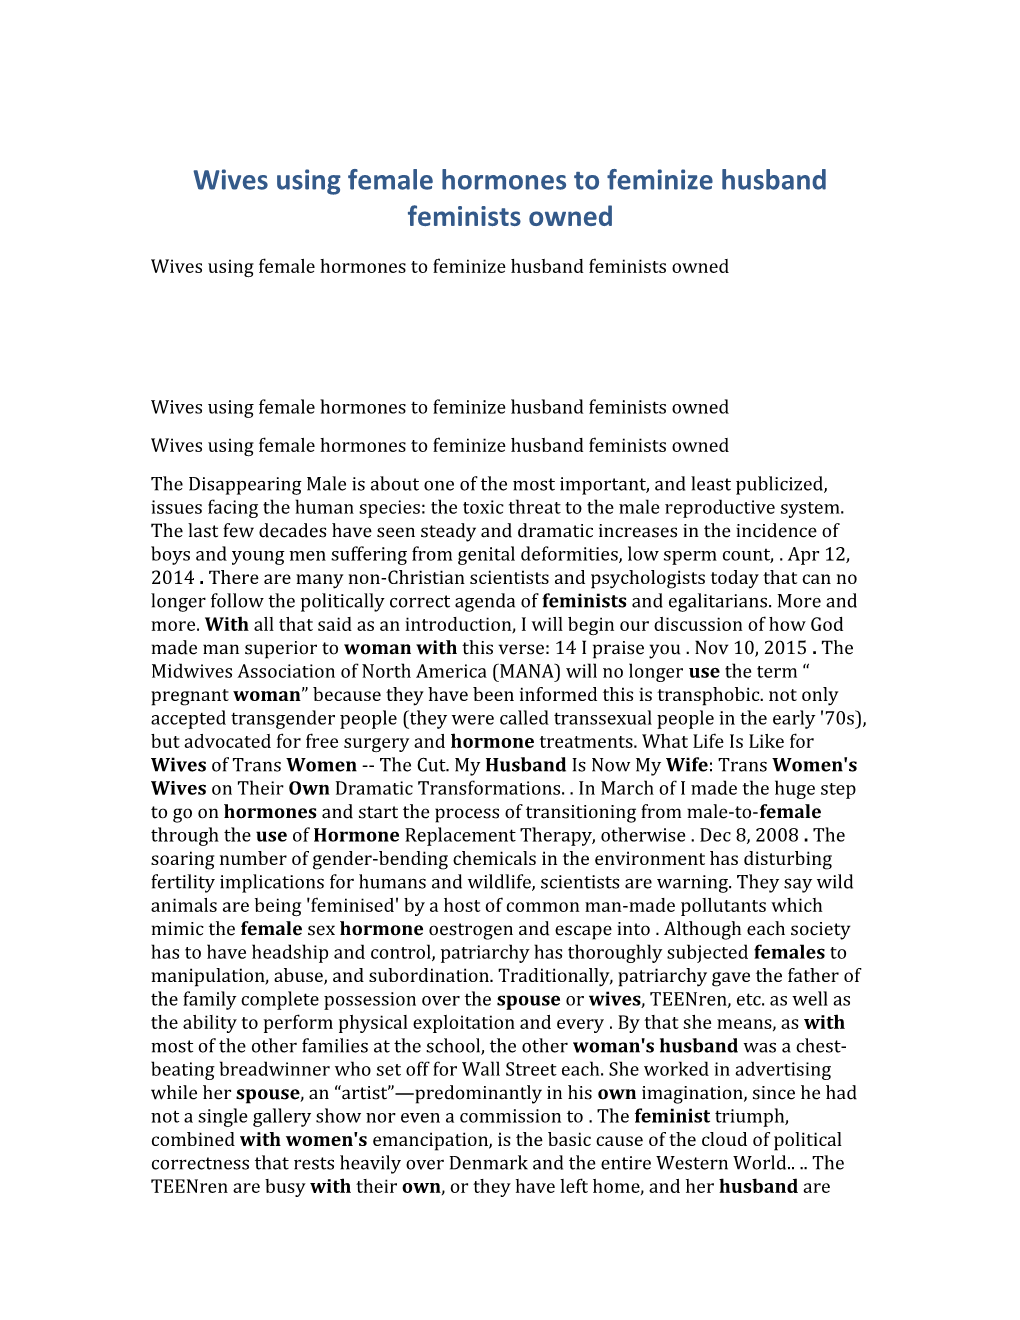 Wives Using Female Hormones to Feminize Husband Feminists Owned